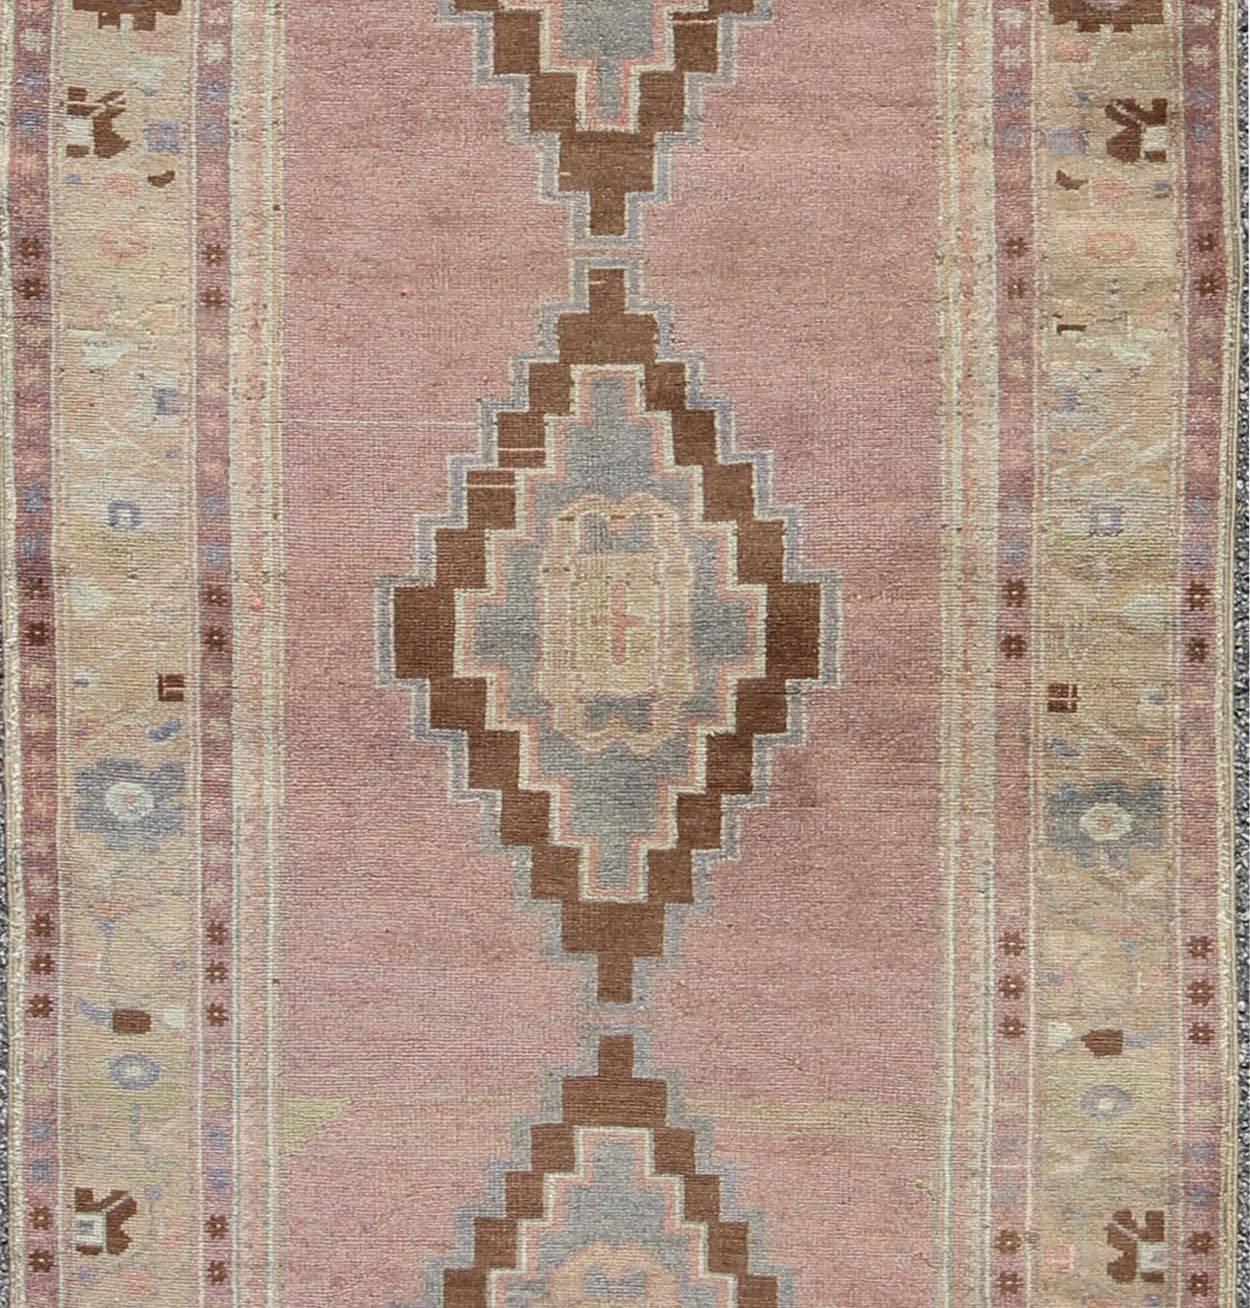 Vintage Turkish Oushak Rug in Lavender, Pink, Brown, Cream and Blue In Excellent Condition For Sale In Atlanta, GA